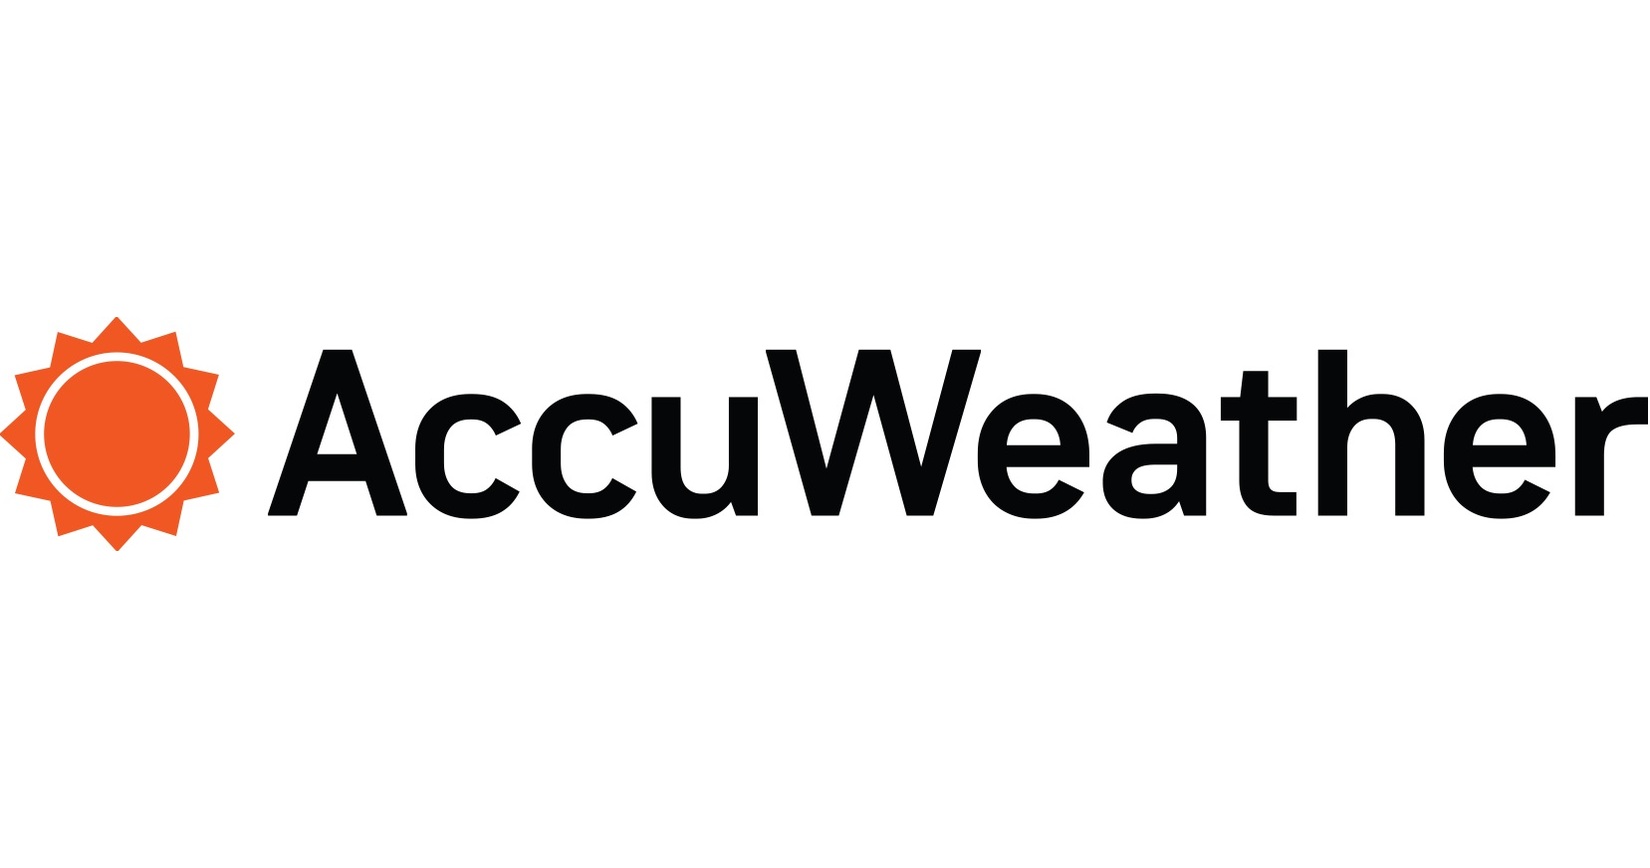 AccuWeather Announces Live Node on Chainlink, Making Weather-Based Blockchain Applications Possible